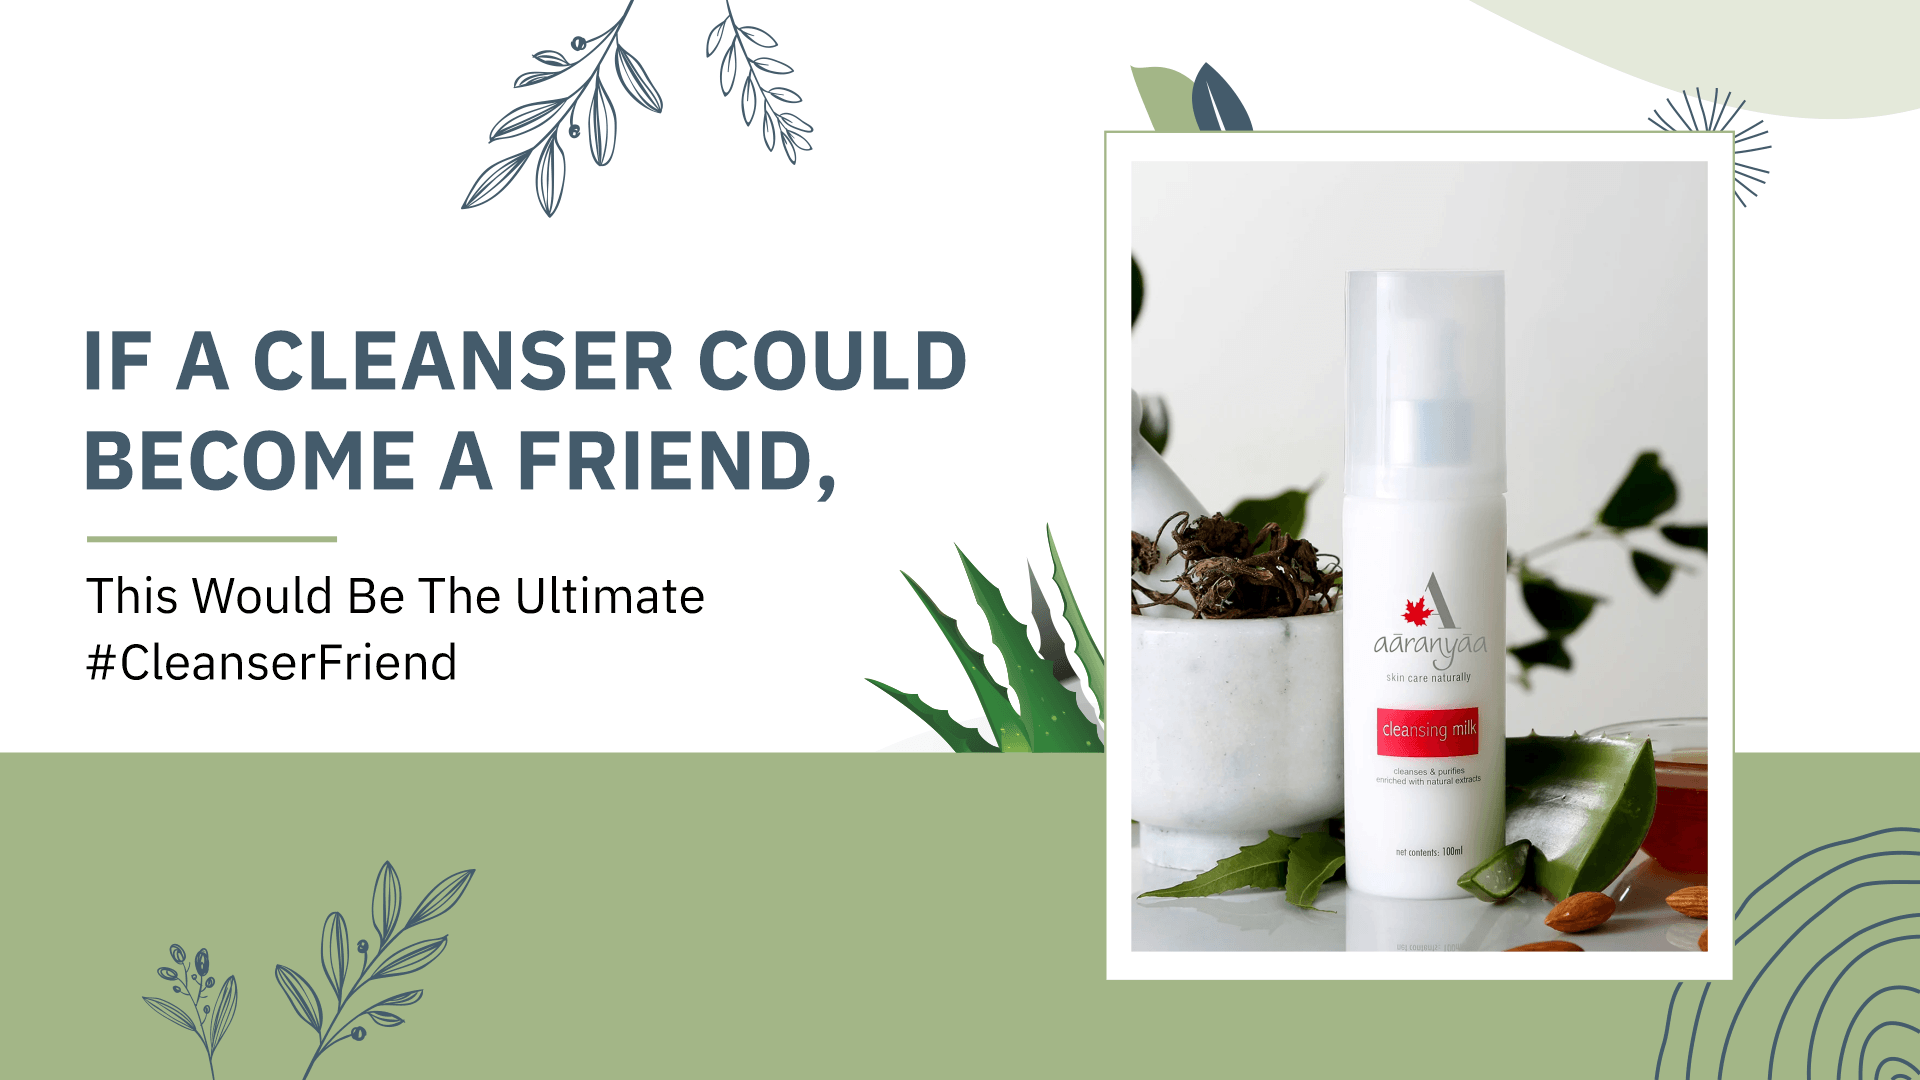 If A Cleanser Could Become A Friend, This Would Be The Ultimate #CleanserFriend - aaranyaa skincare